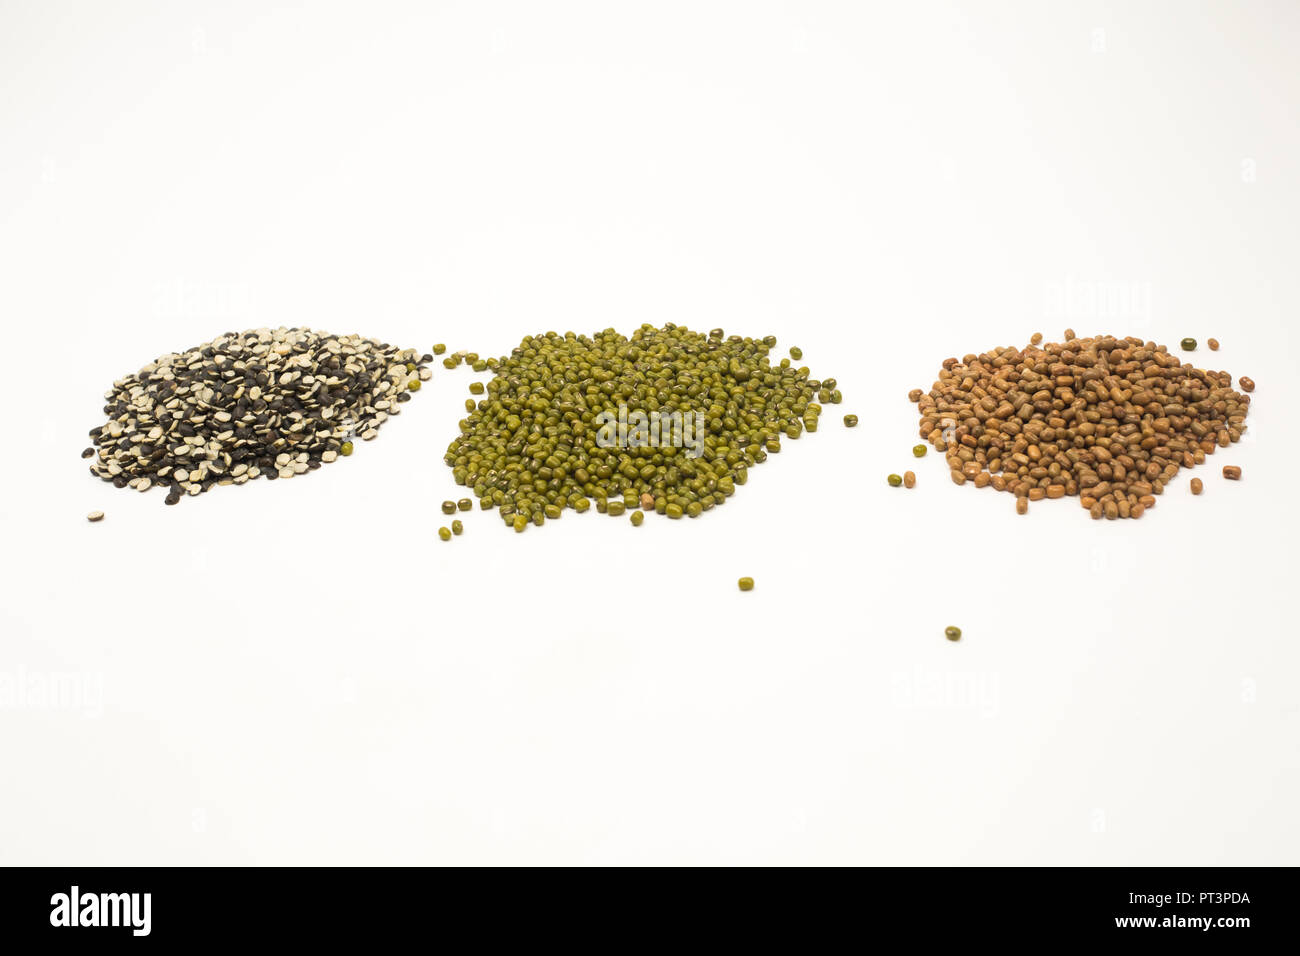 Pile of pulses split black lentil, mung beans, pigeon pea. Isolated on white background. Stock Photo